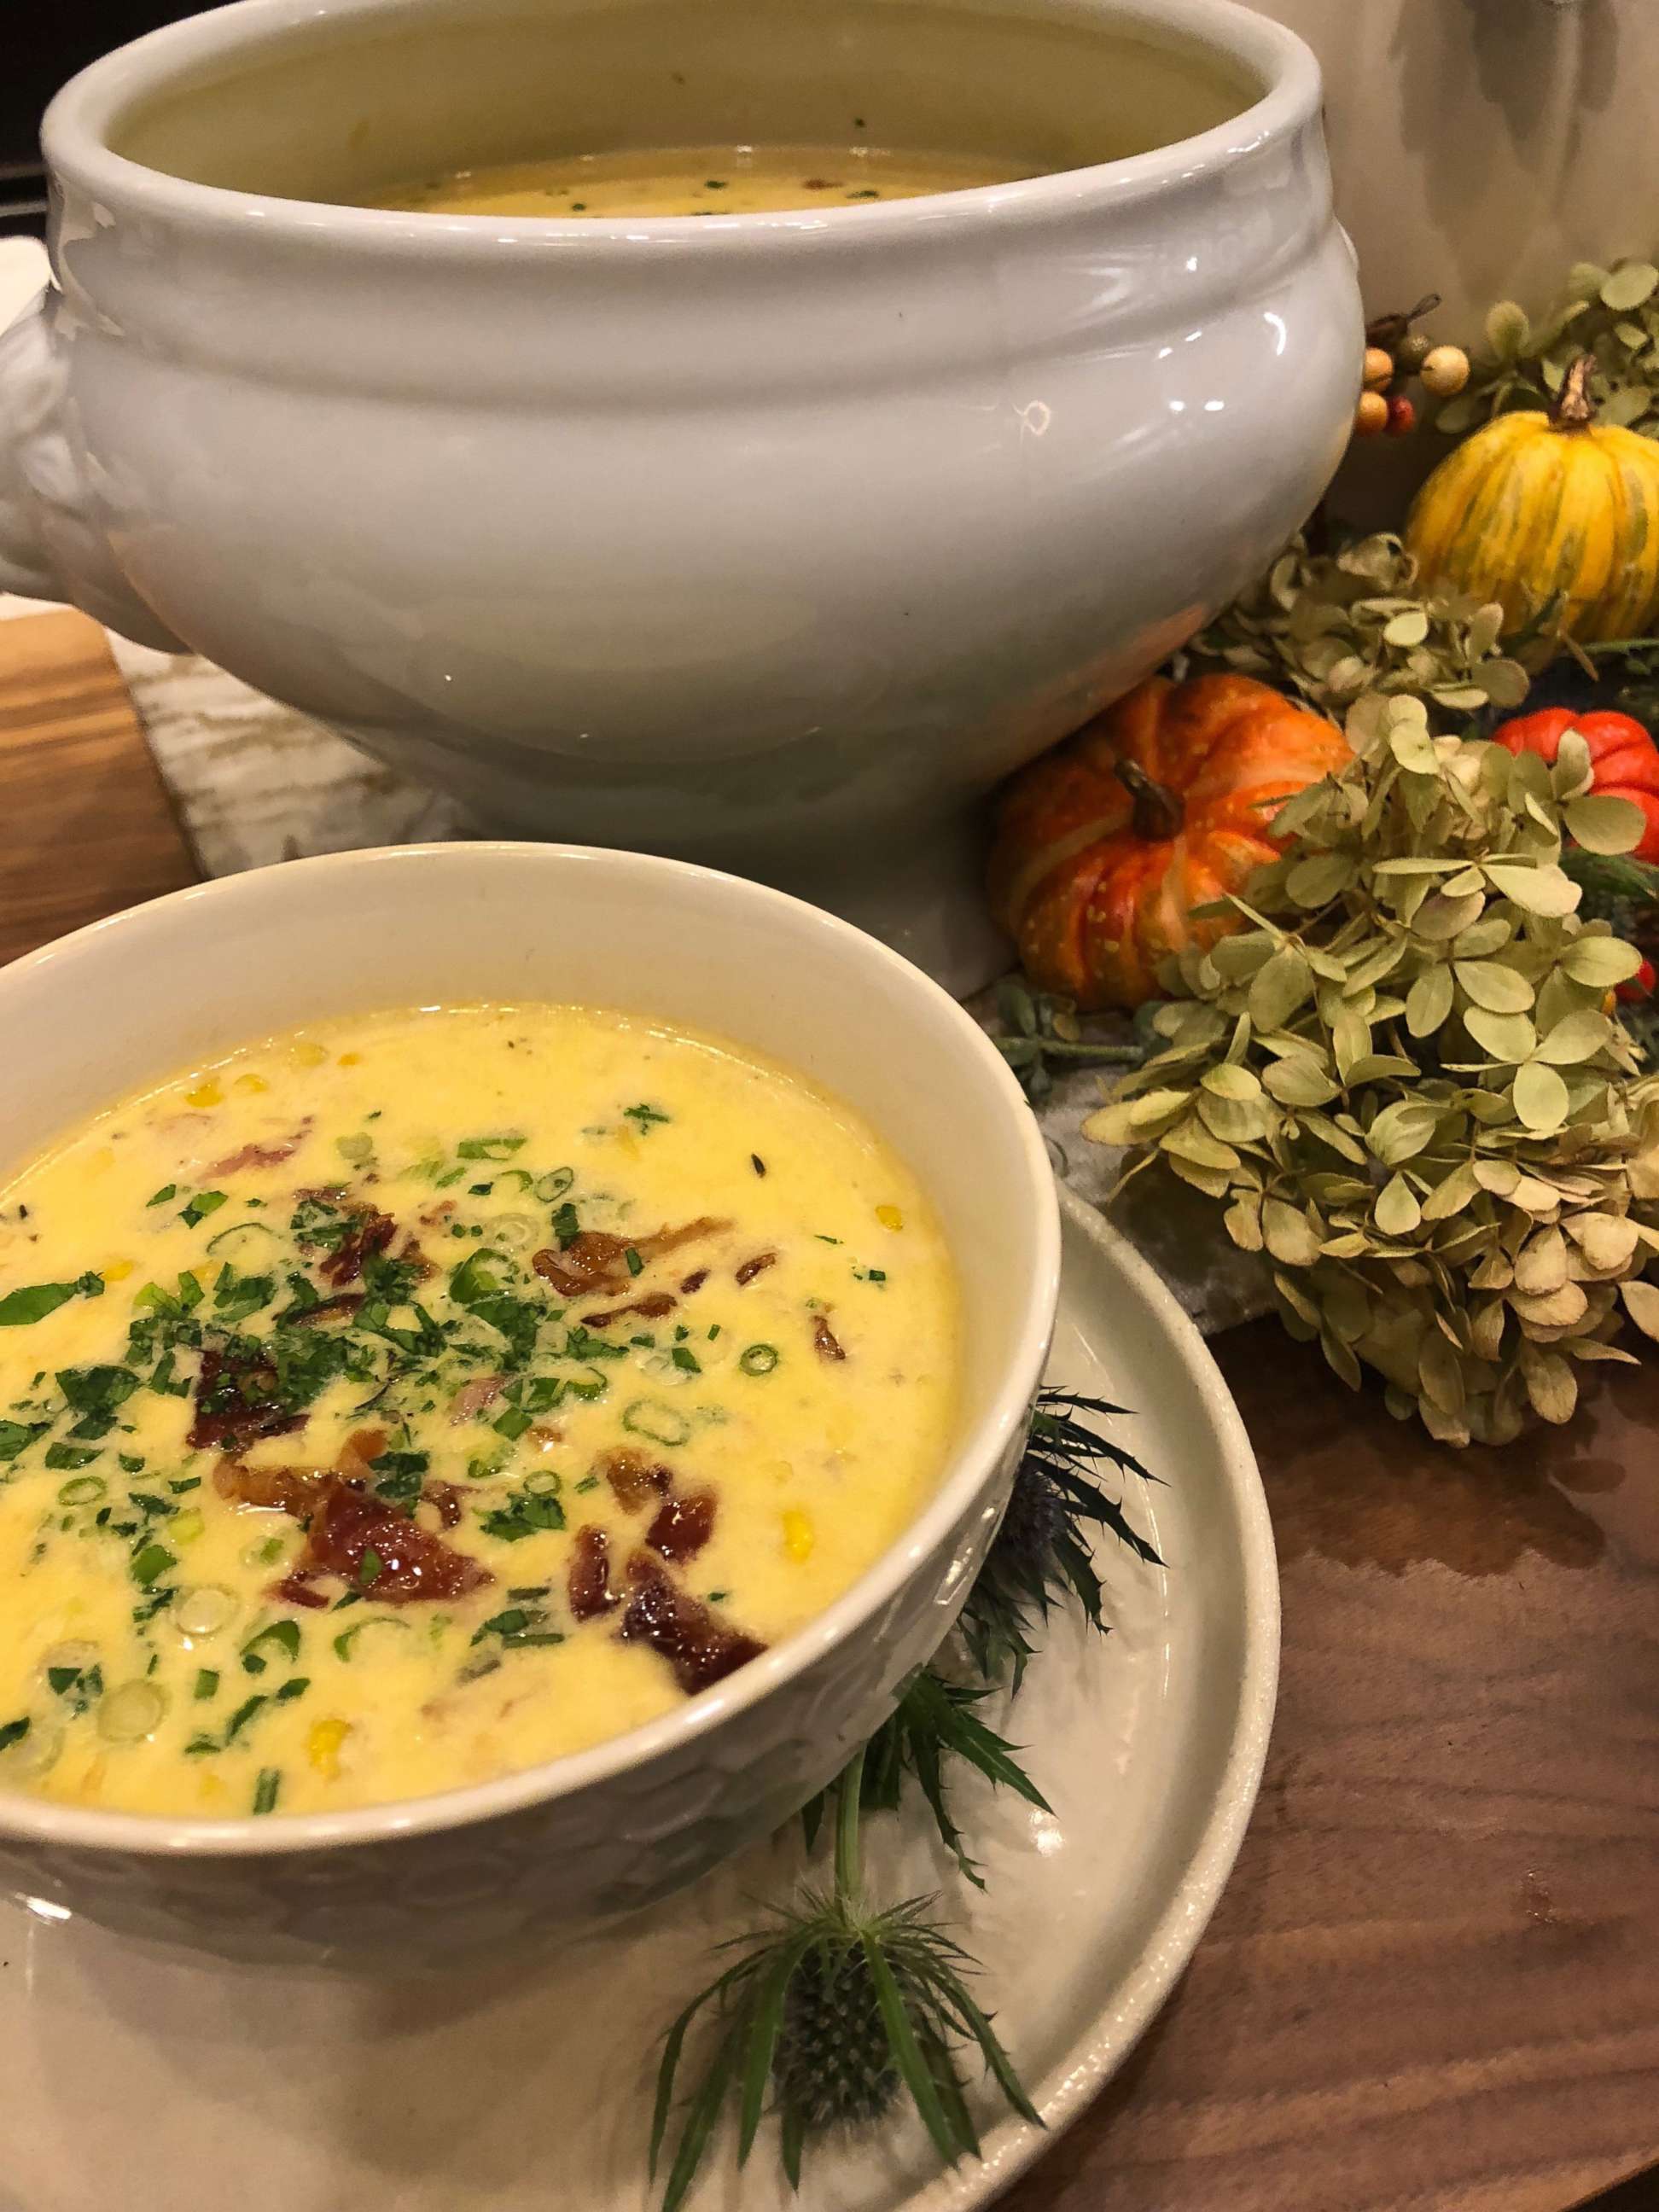 PHOTO: Carla Hall's corn chowder is photographed here.